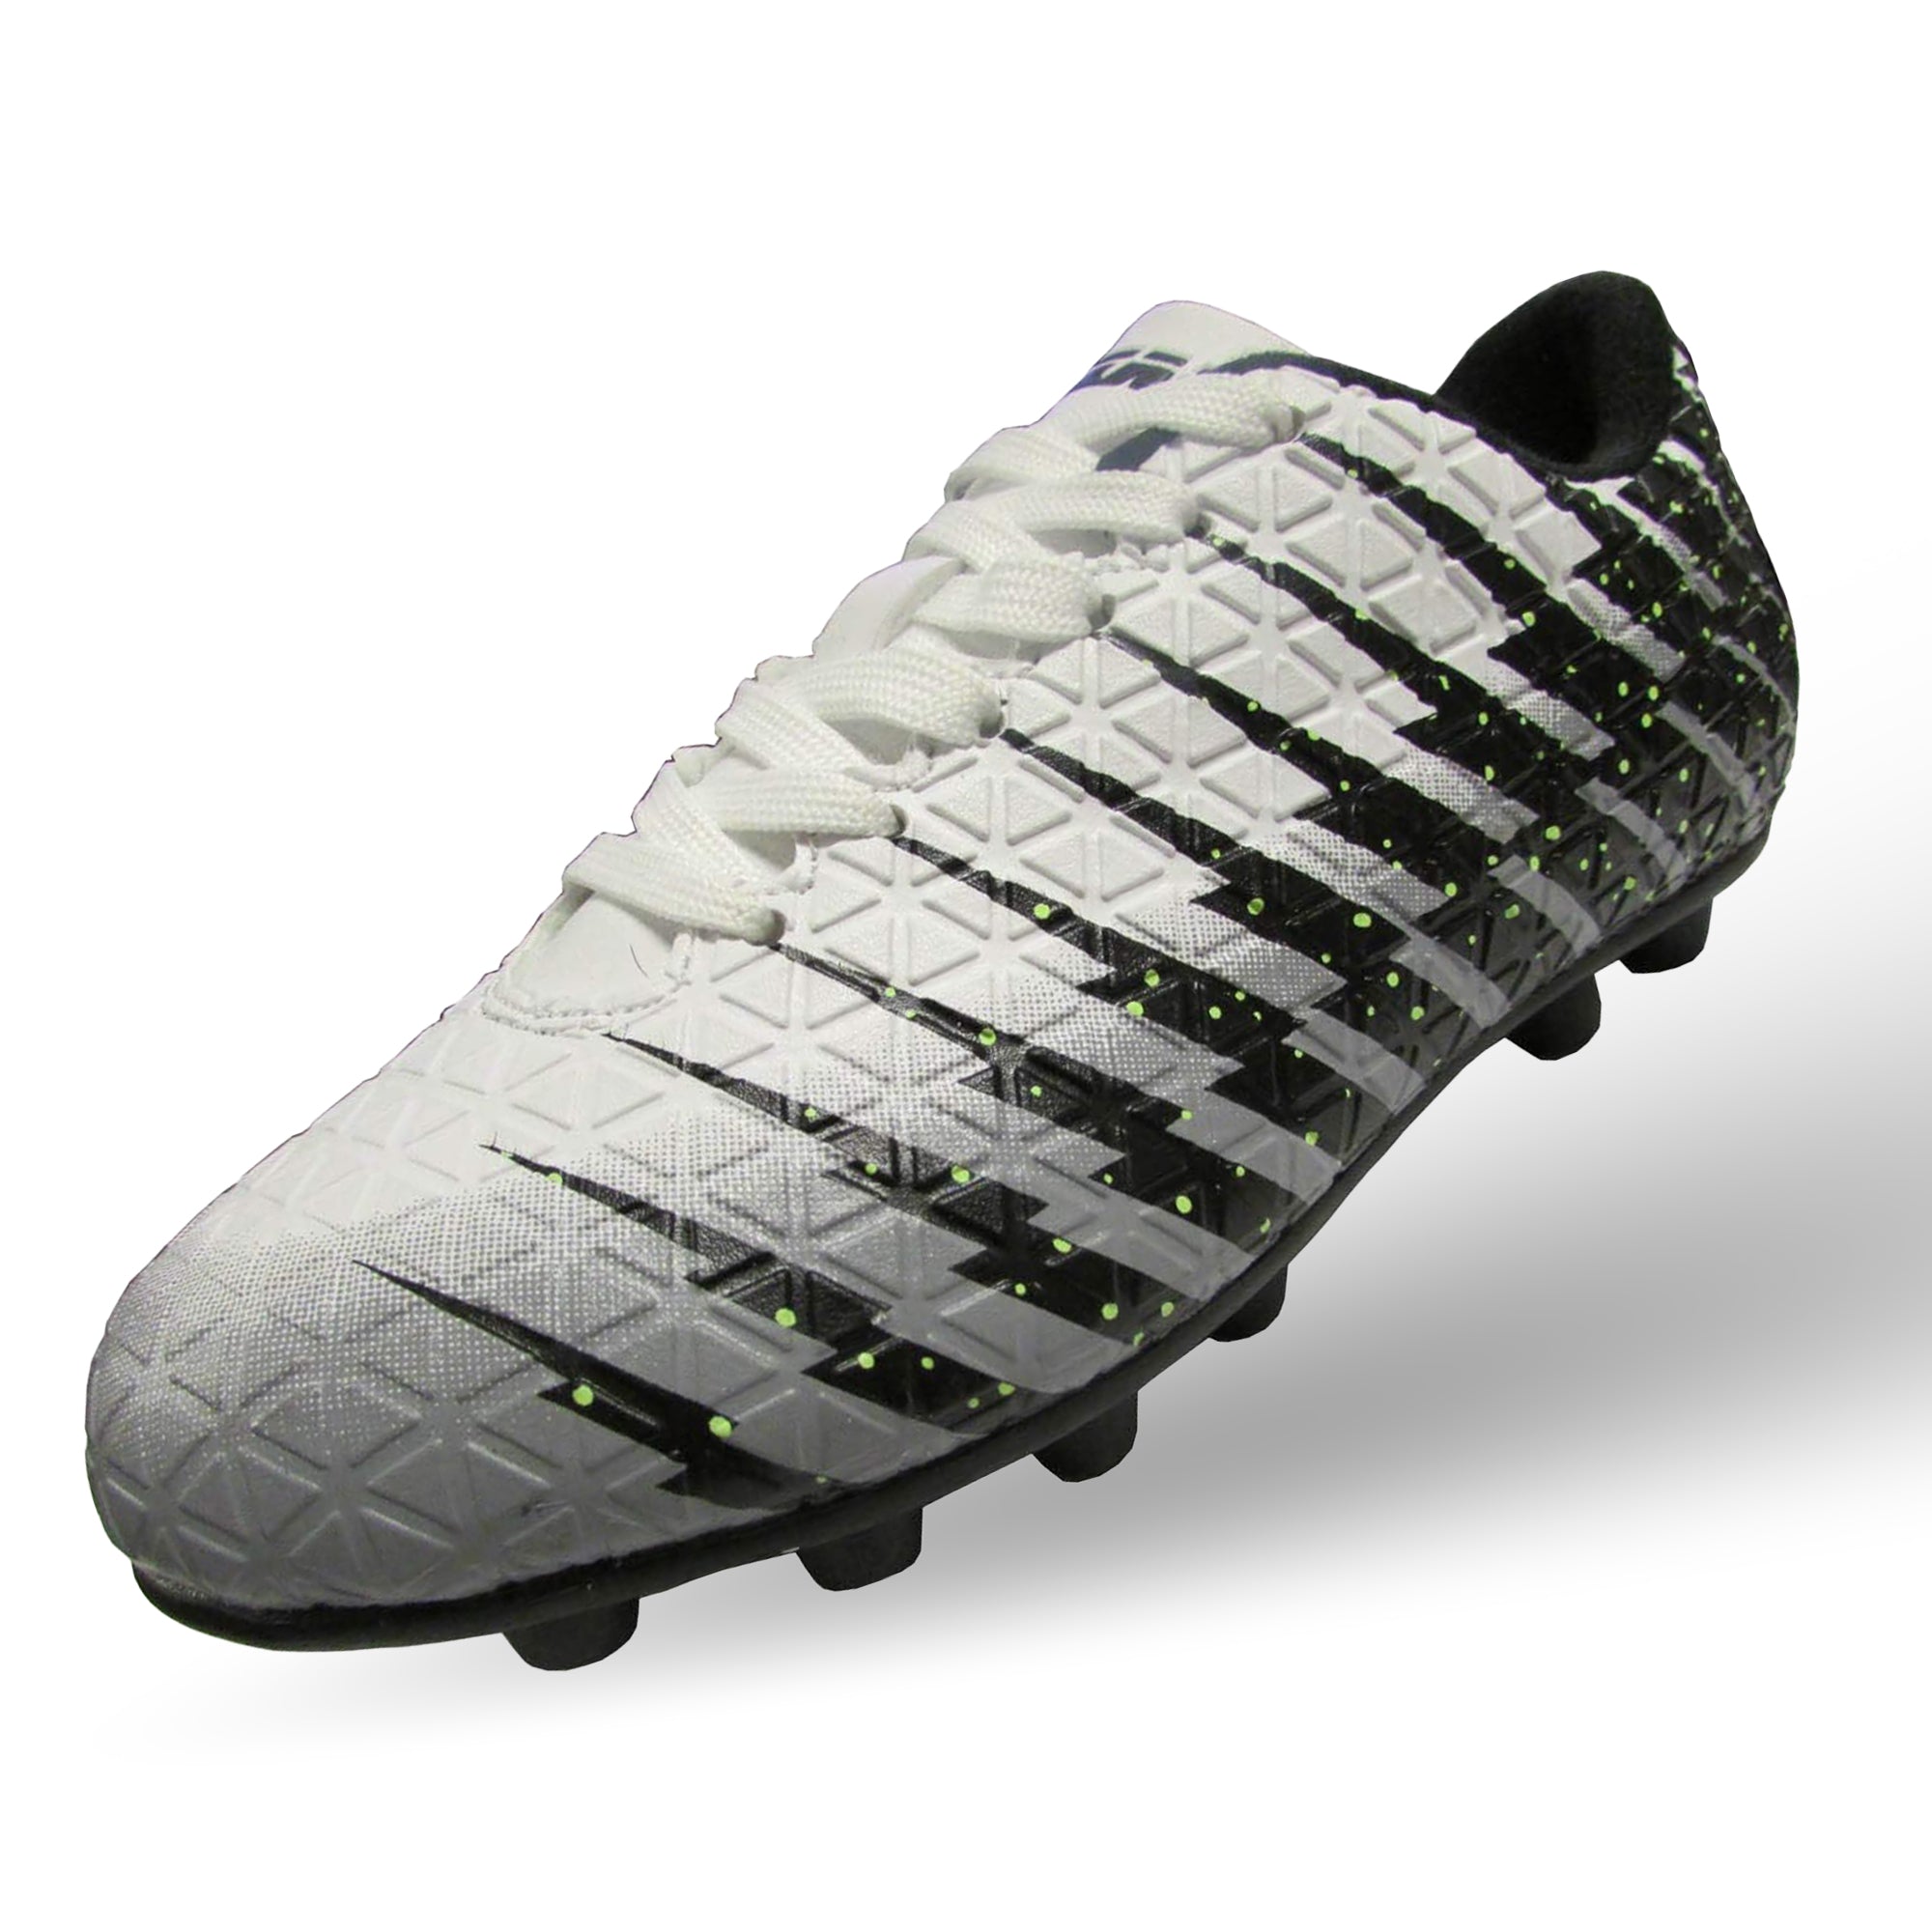 Bolt Firm Ground Soccer Shoes-White/Black/Silver